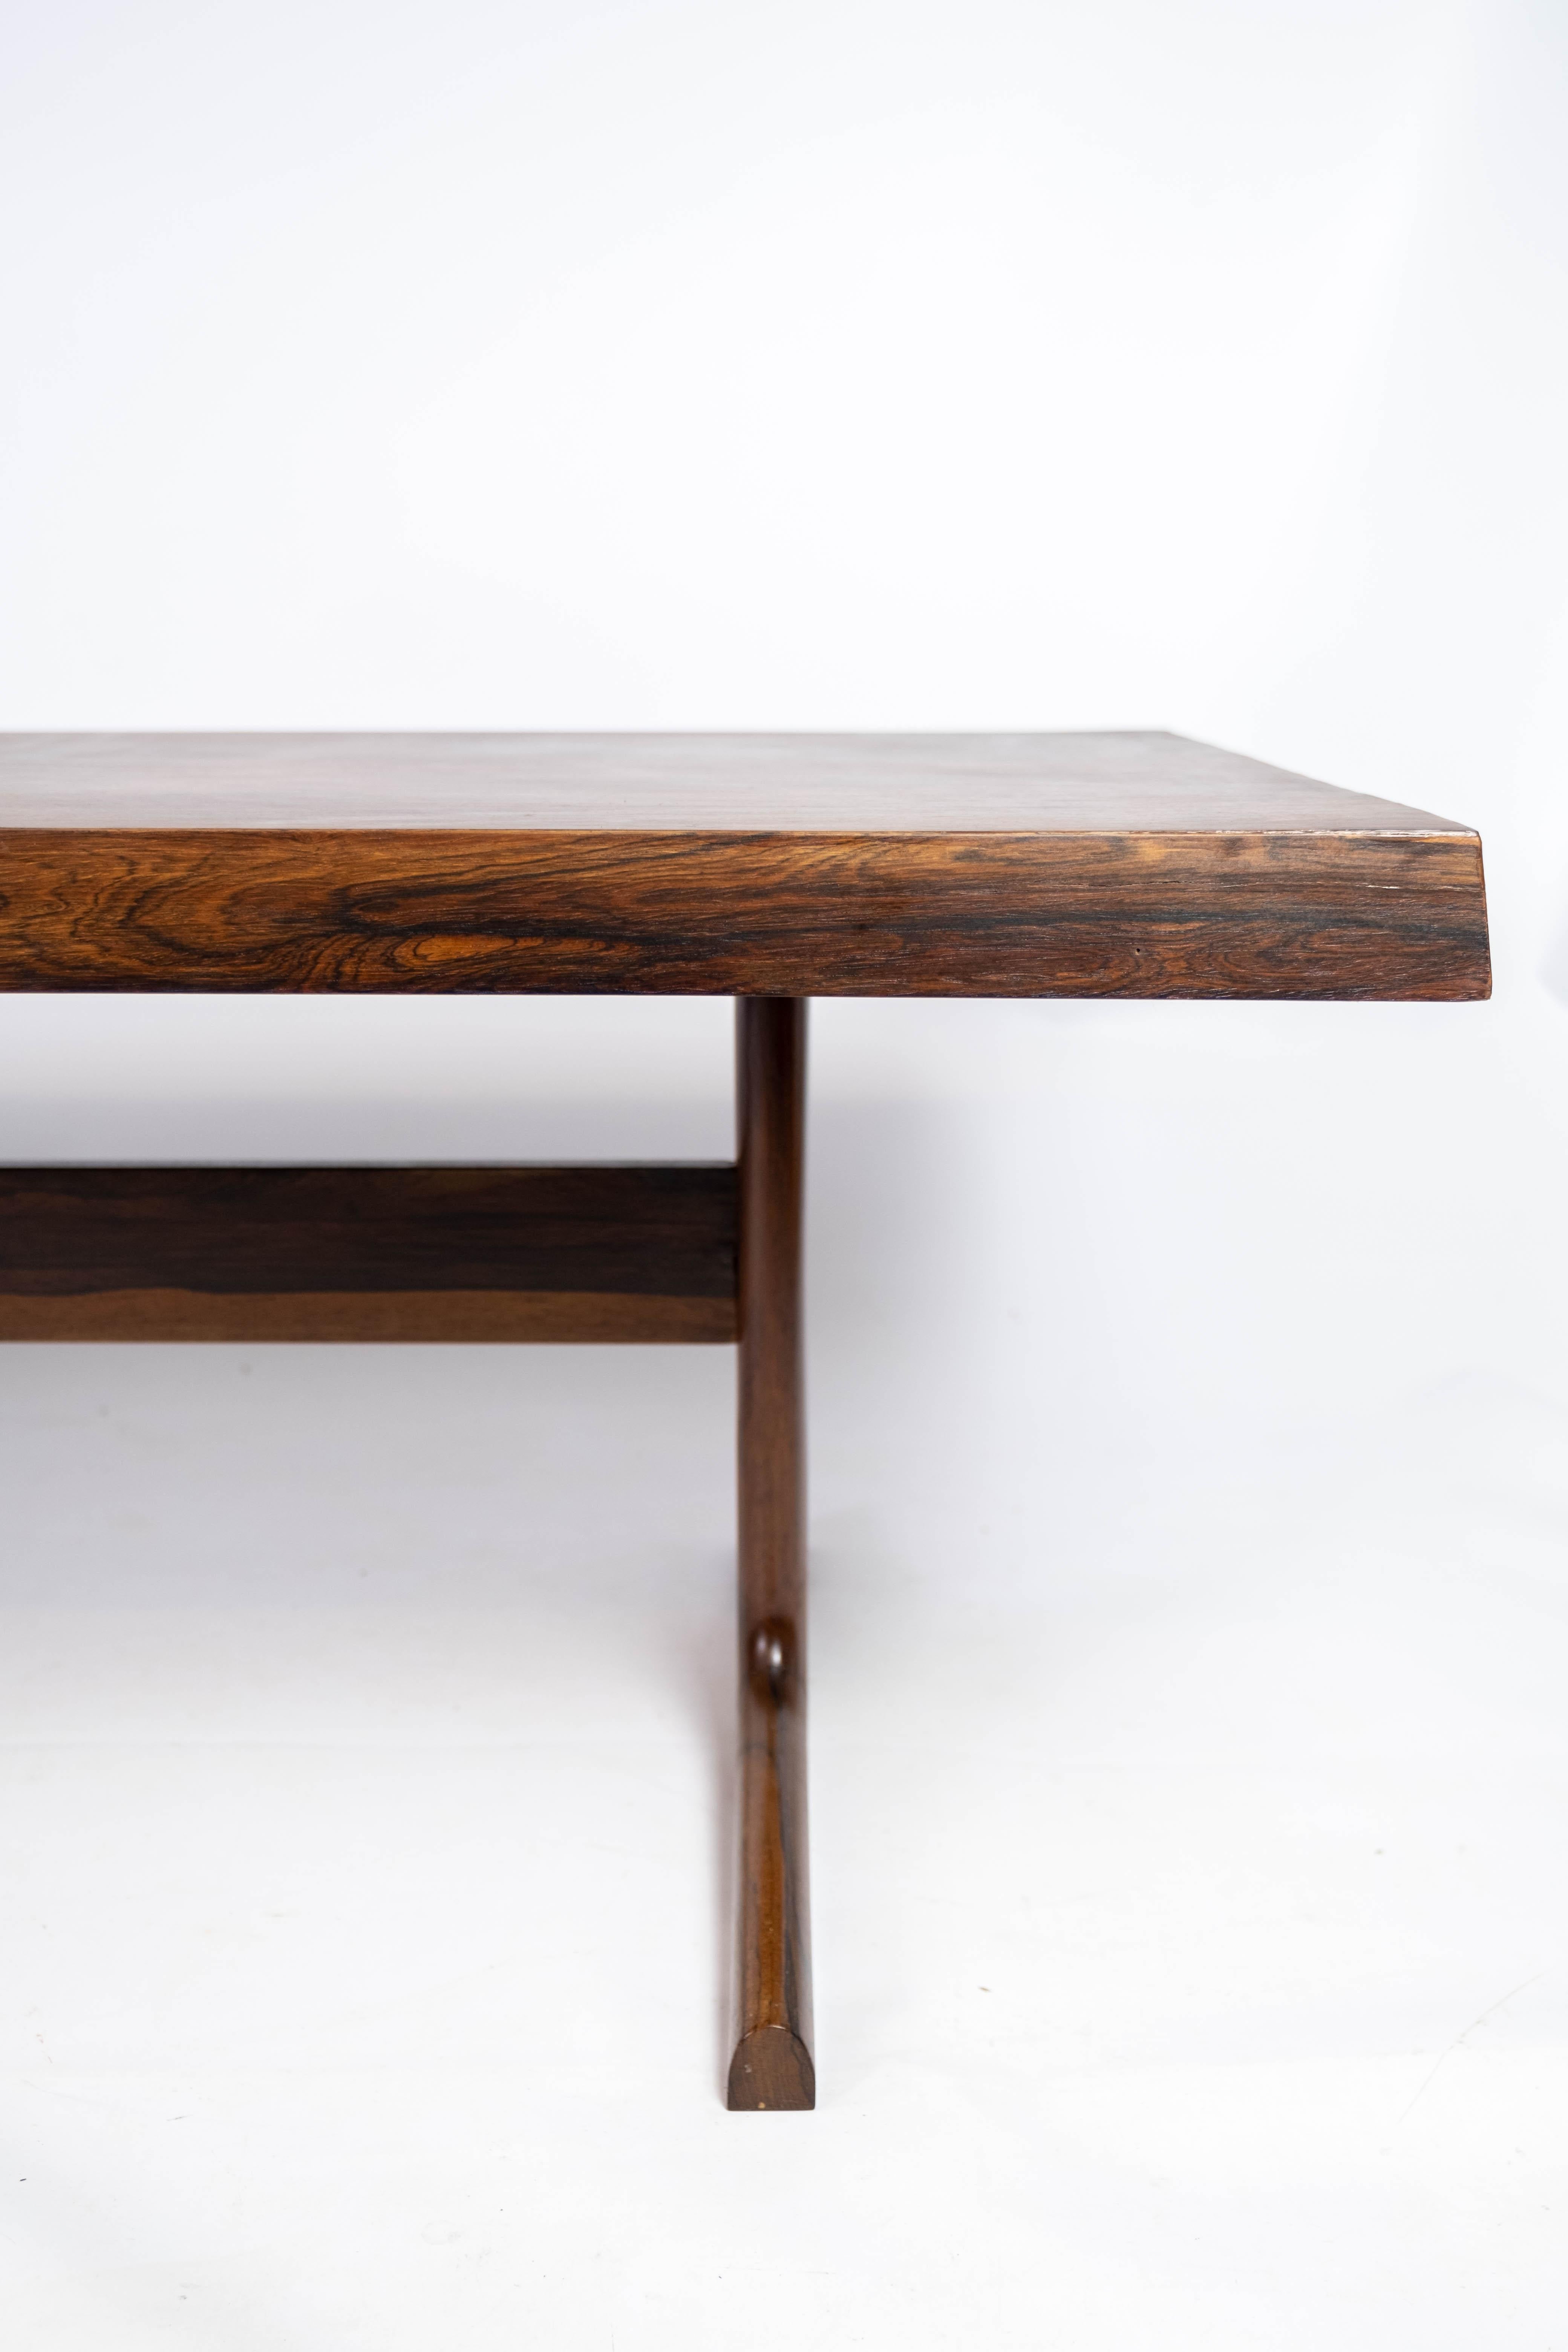 Coffee Table Made In Rosewood With Shaker Legs, Danish Design From 1960s In Good Condition For Sale In Lejre, DK